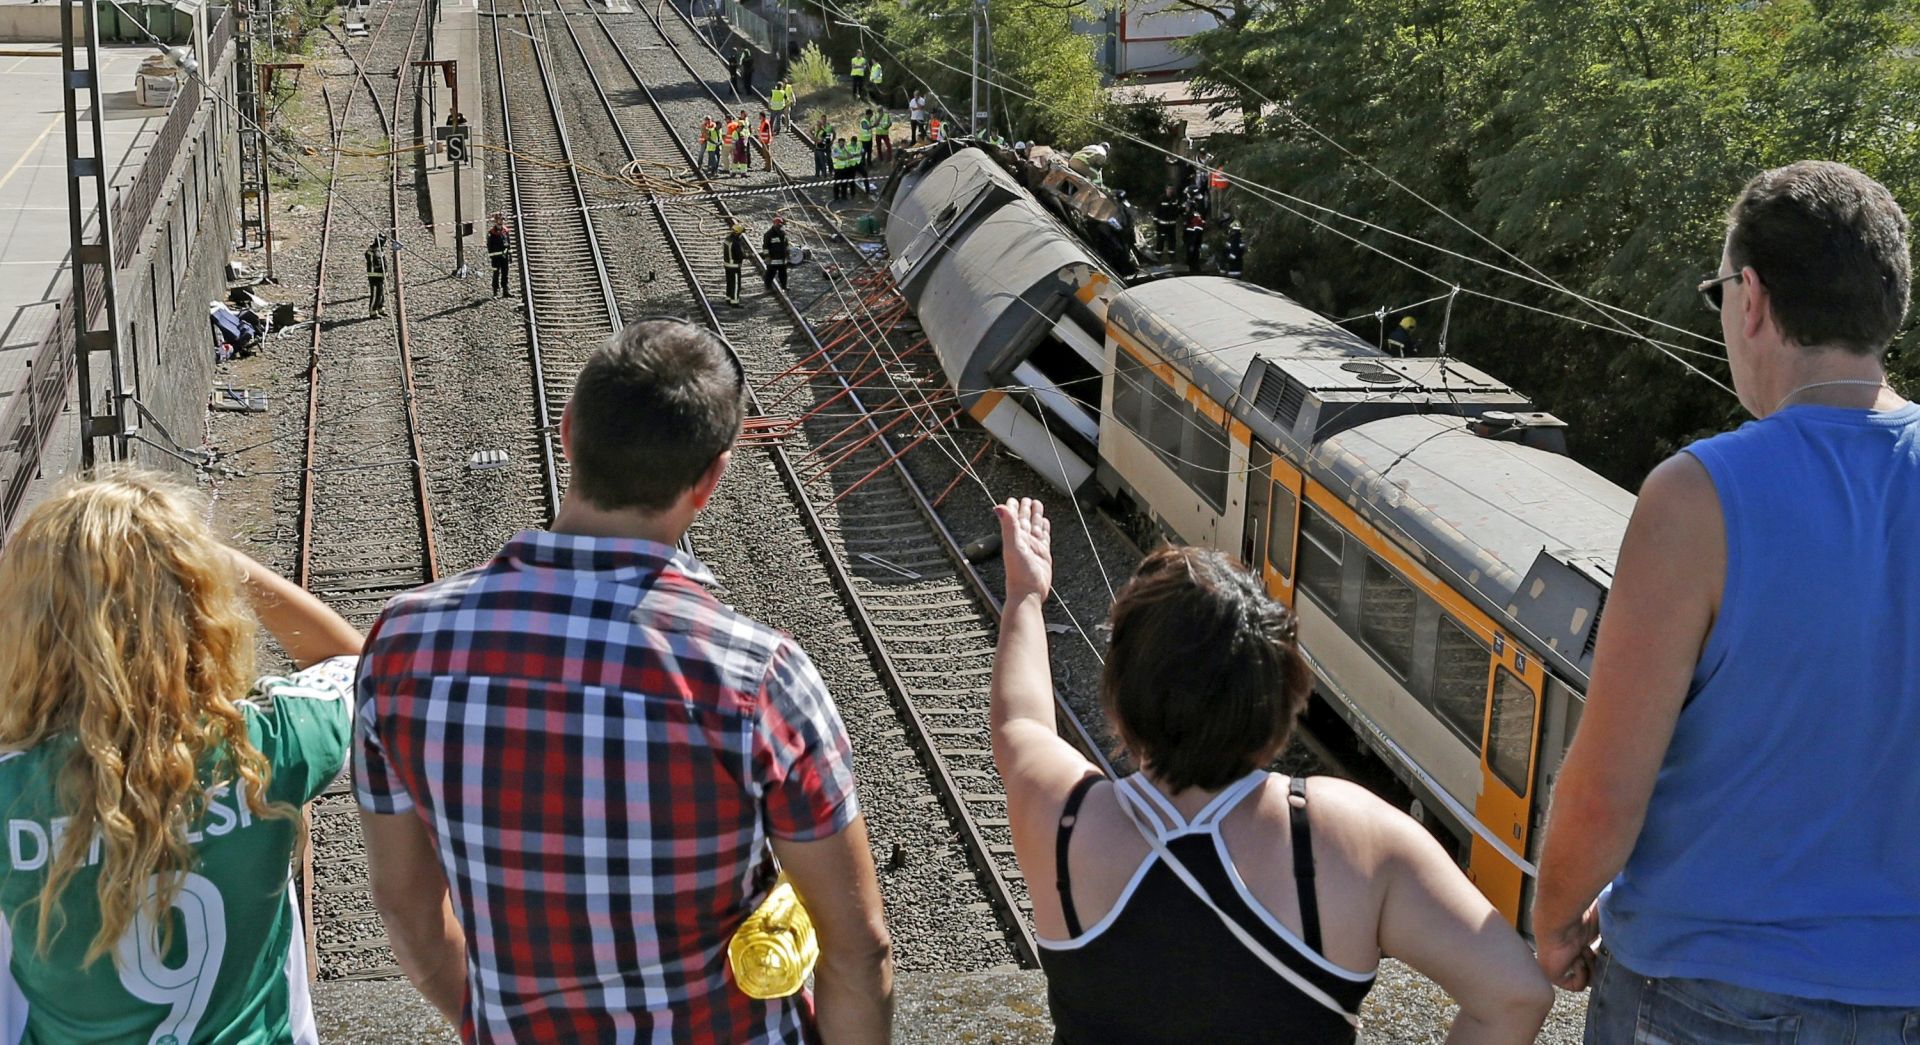 epa05532103 People watch emergency services personell work at the site of a train derailment near O Porrino in Pontevedra, resulting in the death of at least four people and the injury of another 50 people, in the northwestern province of Galicia, Spain, 09 September 2016. The train covering the Vigo-Oporto (Portugal) route was carrying some 60 passengers when one of its three coaches overturned provoking the accident. Spanish rail service Renfe has confirmed that at least two people were dead and a large number injured, some of them serious. Renfe also said that the train belongs to Portuguese company Comboios and that the engine driver has Portuguese citizenship.  EPA/SALVADOR SAS